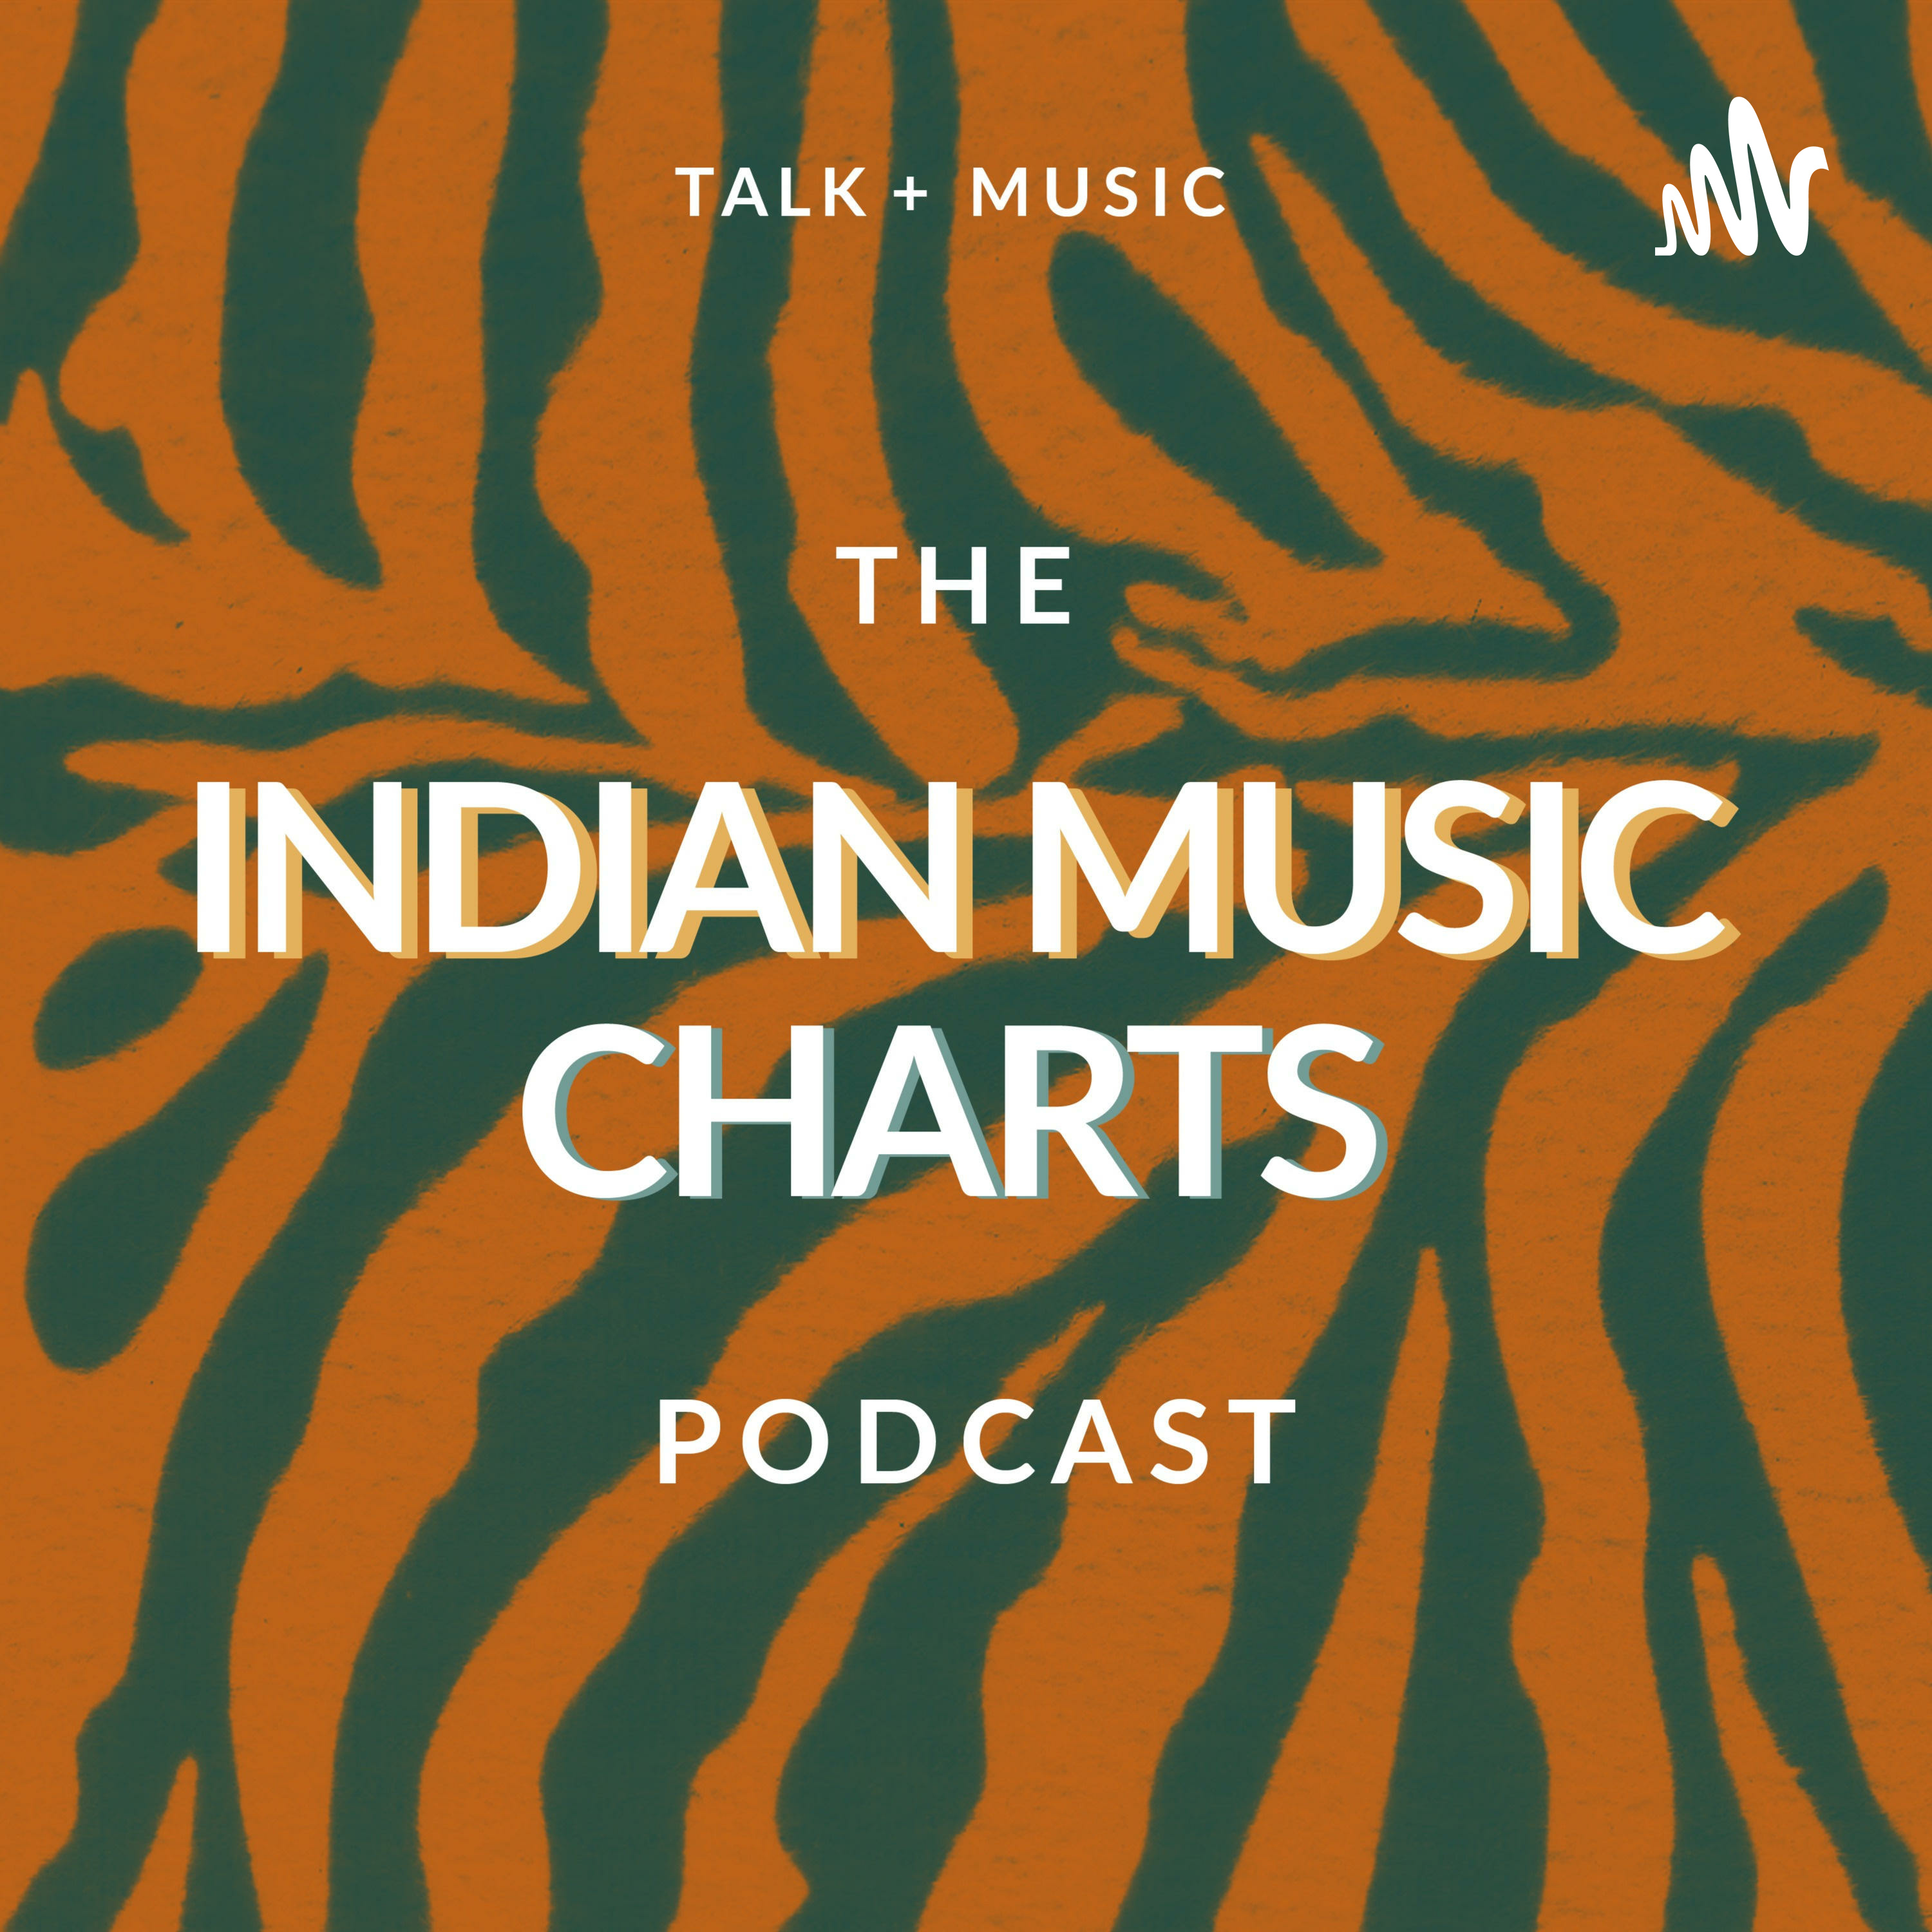 The Indian Music Charts Podcast (Trailer)